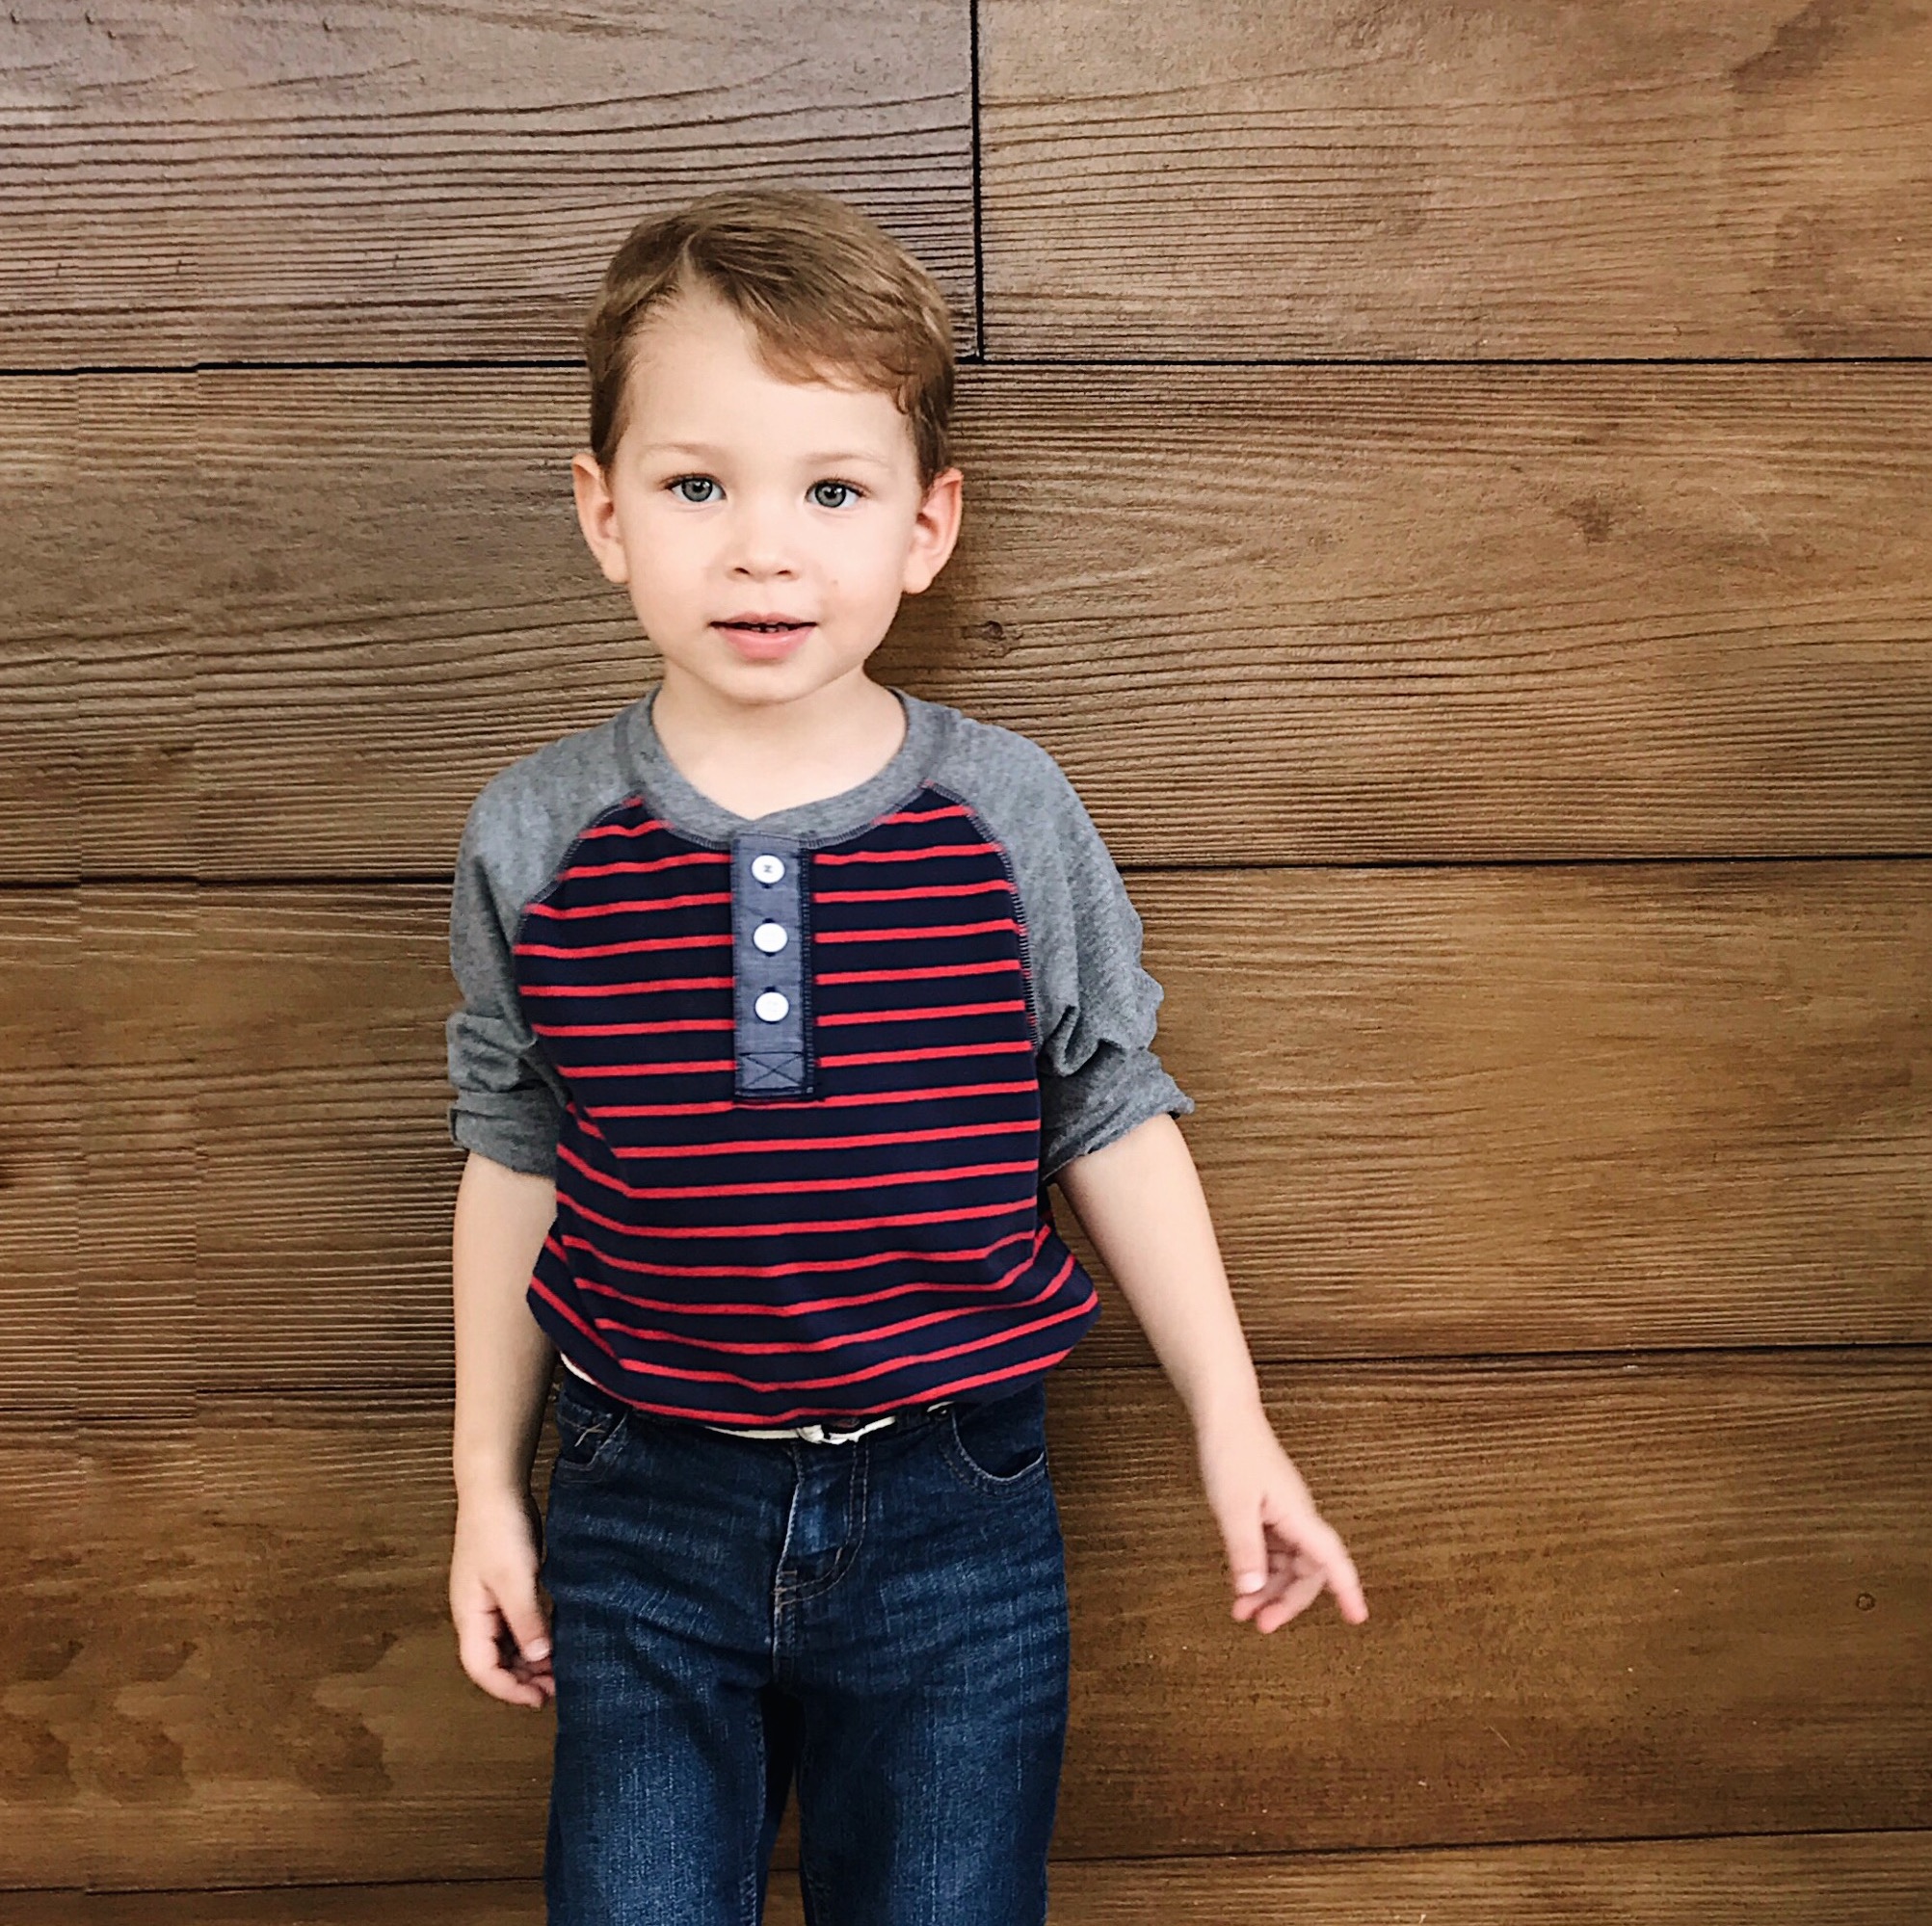 3 things I love about my 3-year-old